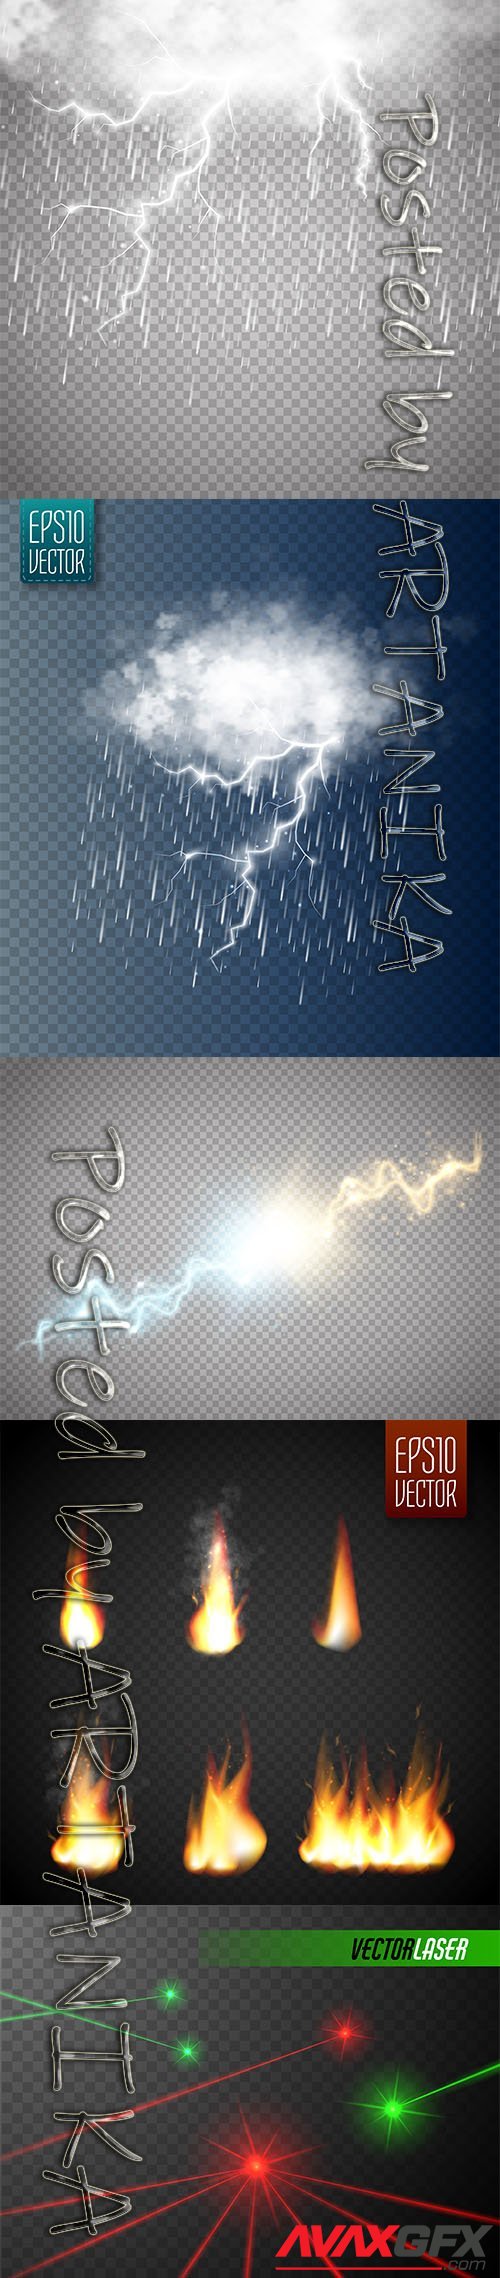 Vector Set of Storm Lightning with Rain, Laser Beams and Fire Flames Isolated Transparent